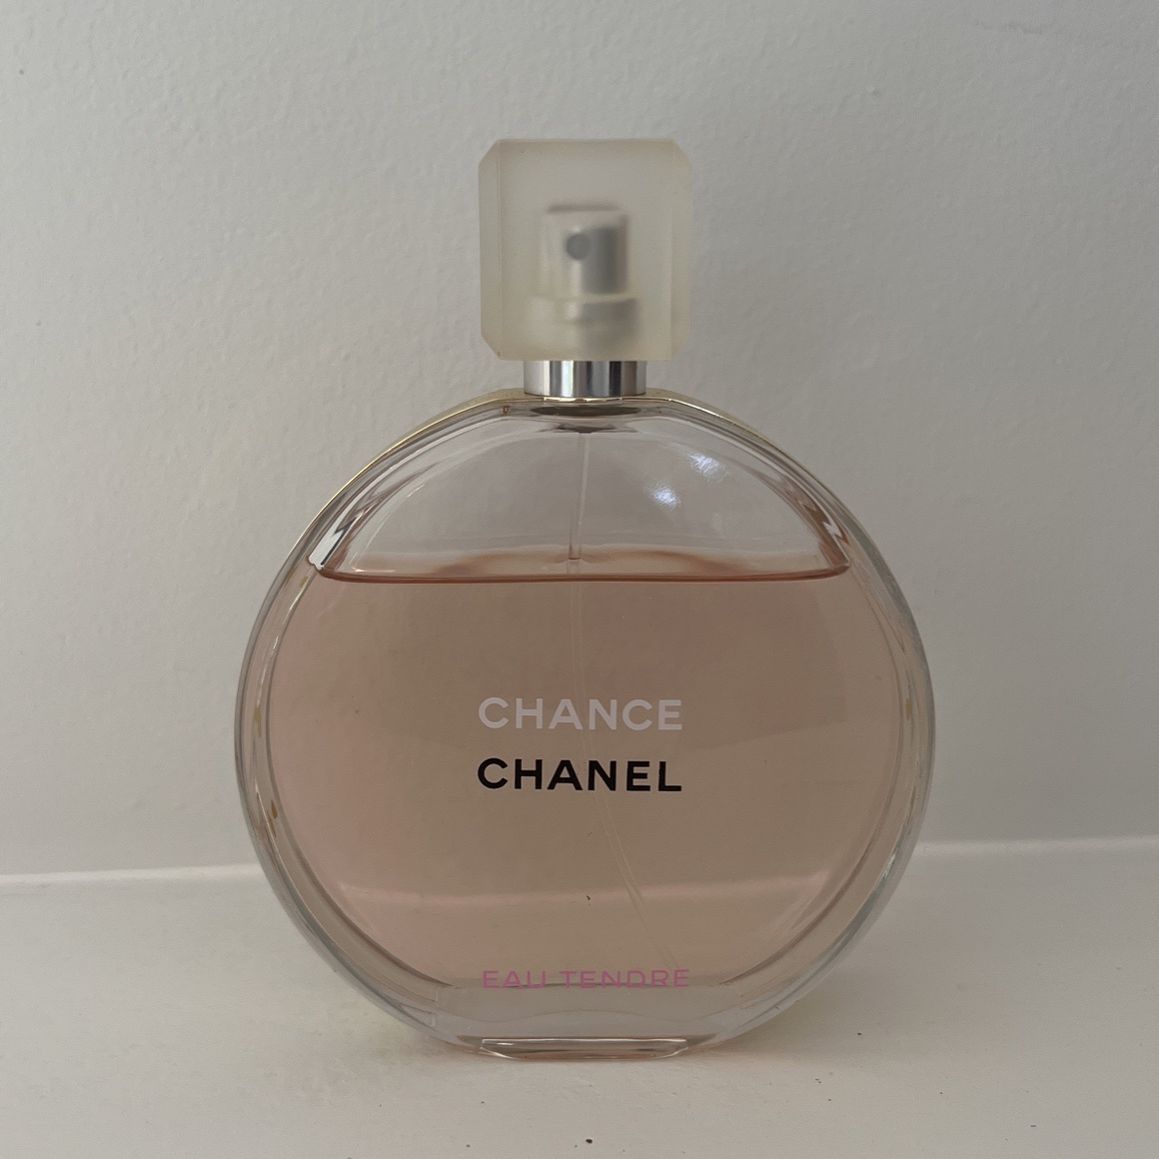 CHANEL Chance Eau Tendre 5oz for Sale in Los Angeles, CA